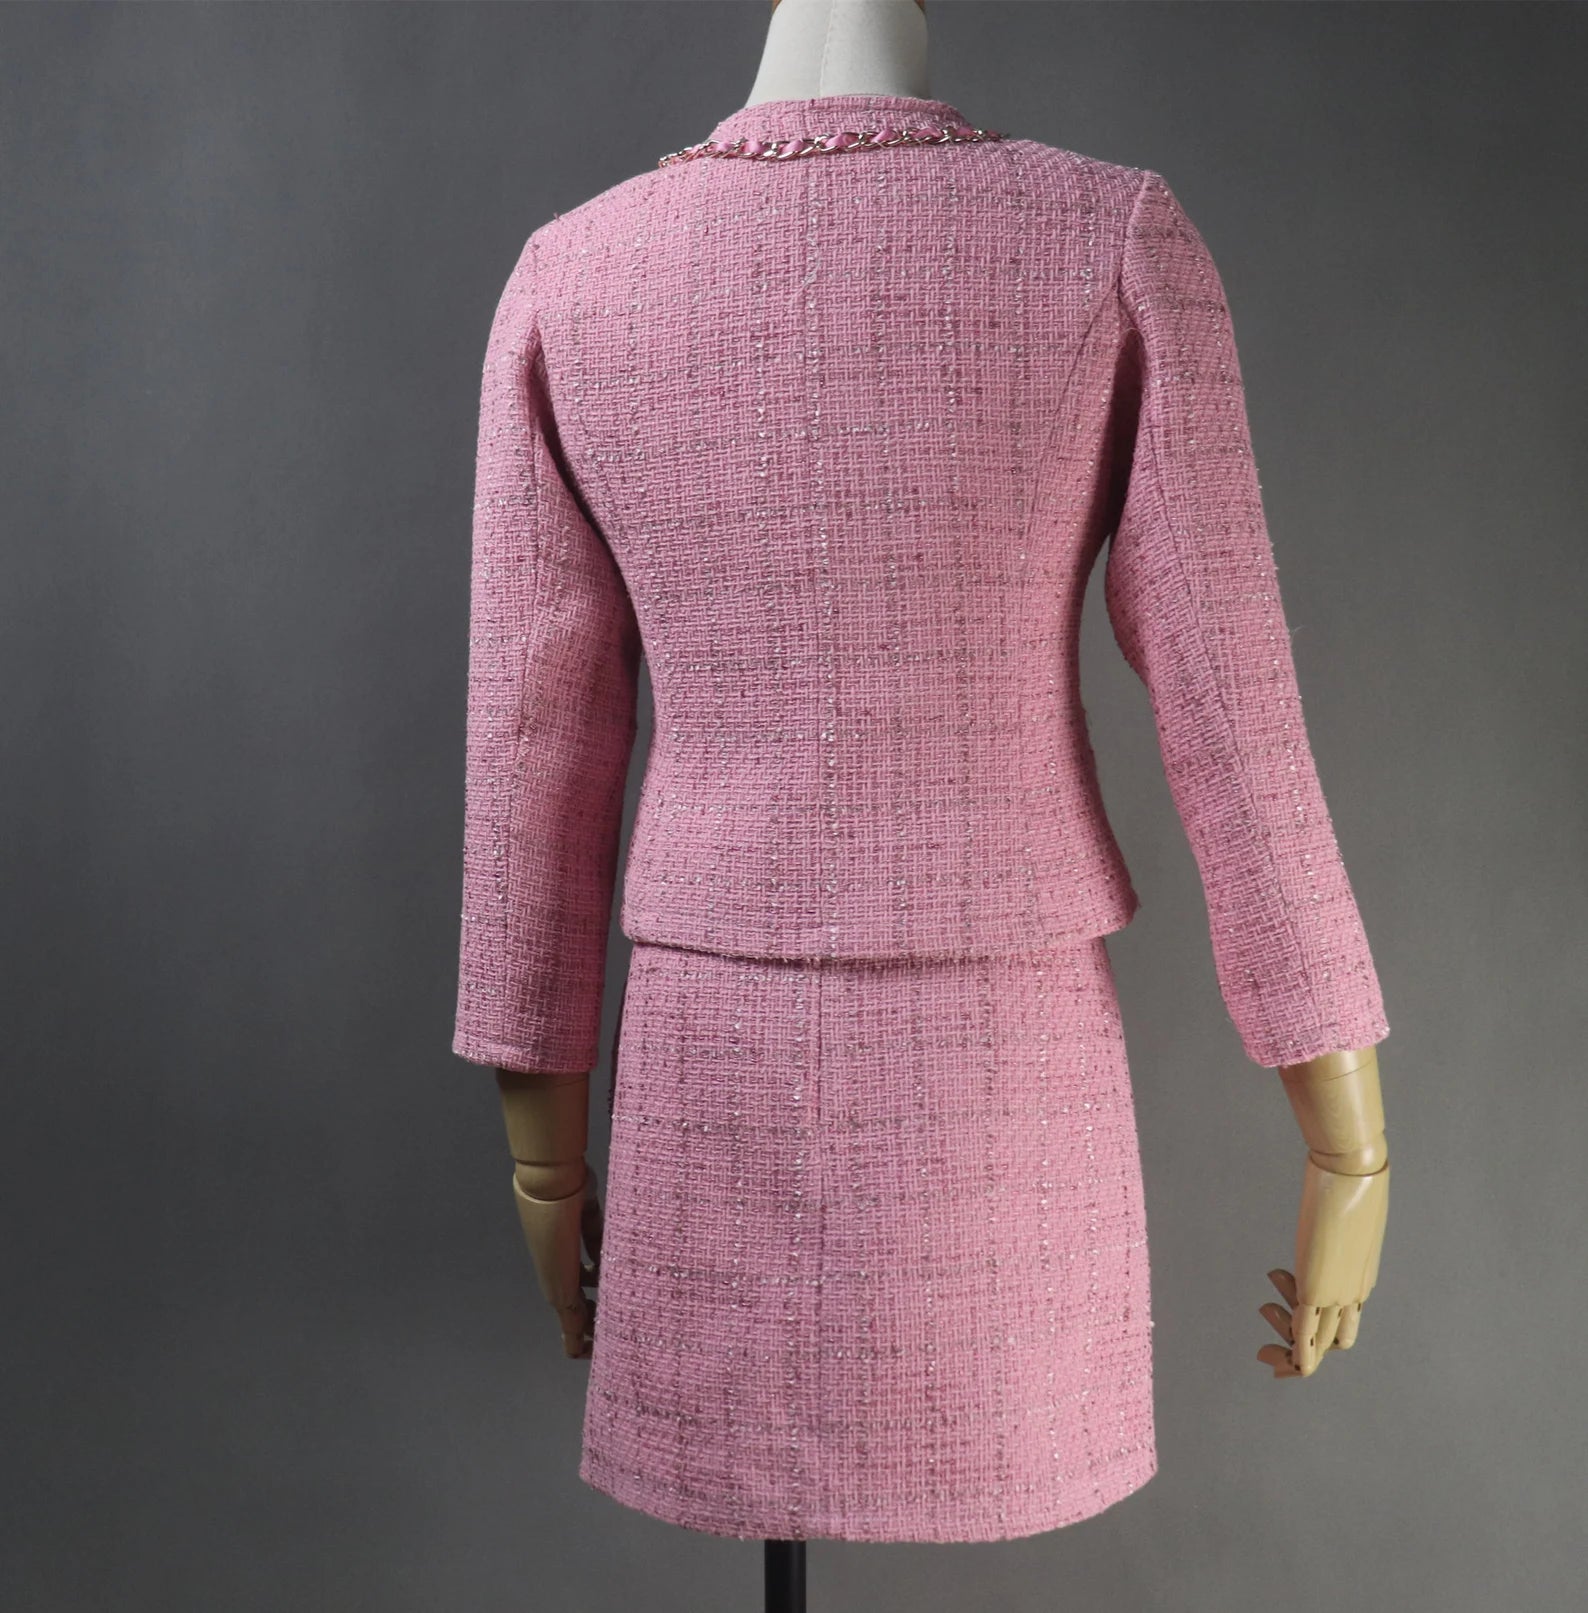 Luxuries Ladies Hand Made Custom Made Chain Decoration Pink Tweed Blazer(10% discount)  "More Than 10% Additional Discount when you buy both  Jacket  +Skirt or Jacket + Shorts"   UK CUSTOMER SERVICE! Women Custom  Blue Hand Made Custom Made Pearl Ruffle Trim Tweed Blazer + Skirt / Shorts Suit (more than 10% discount) -Make an impression with a timeless tweed suit, whether for a wedding, the Office interview, graduation, Inauguration or a new job.